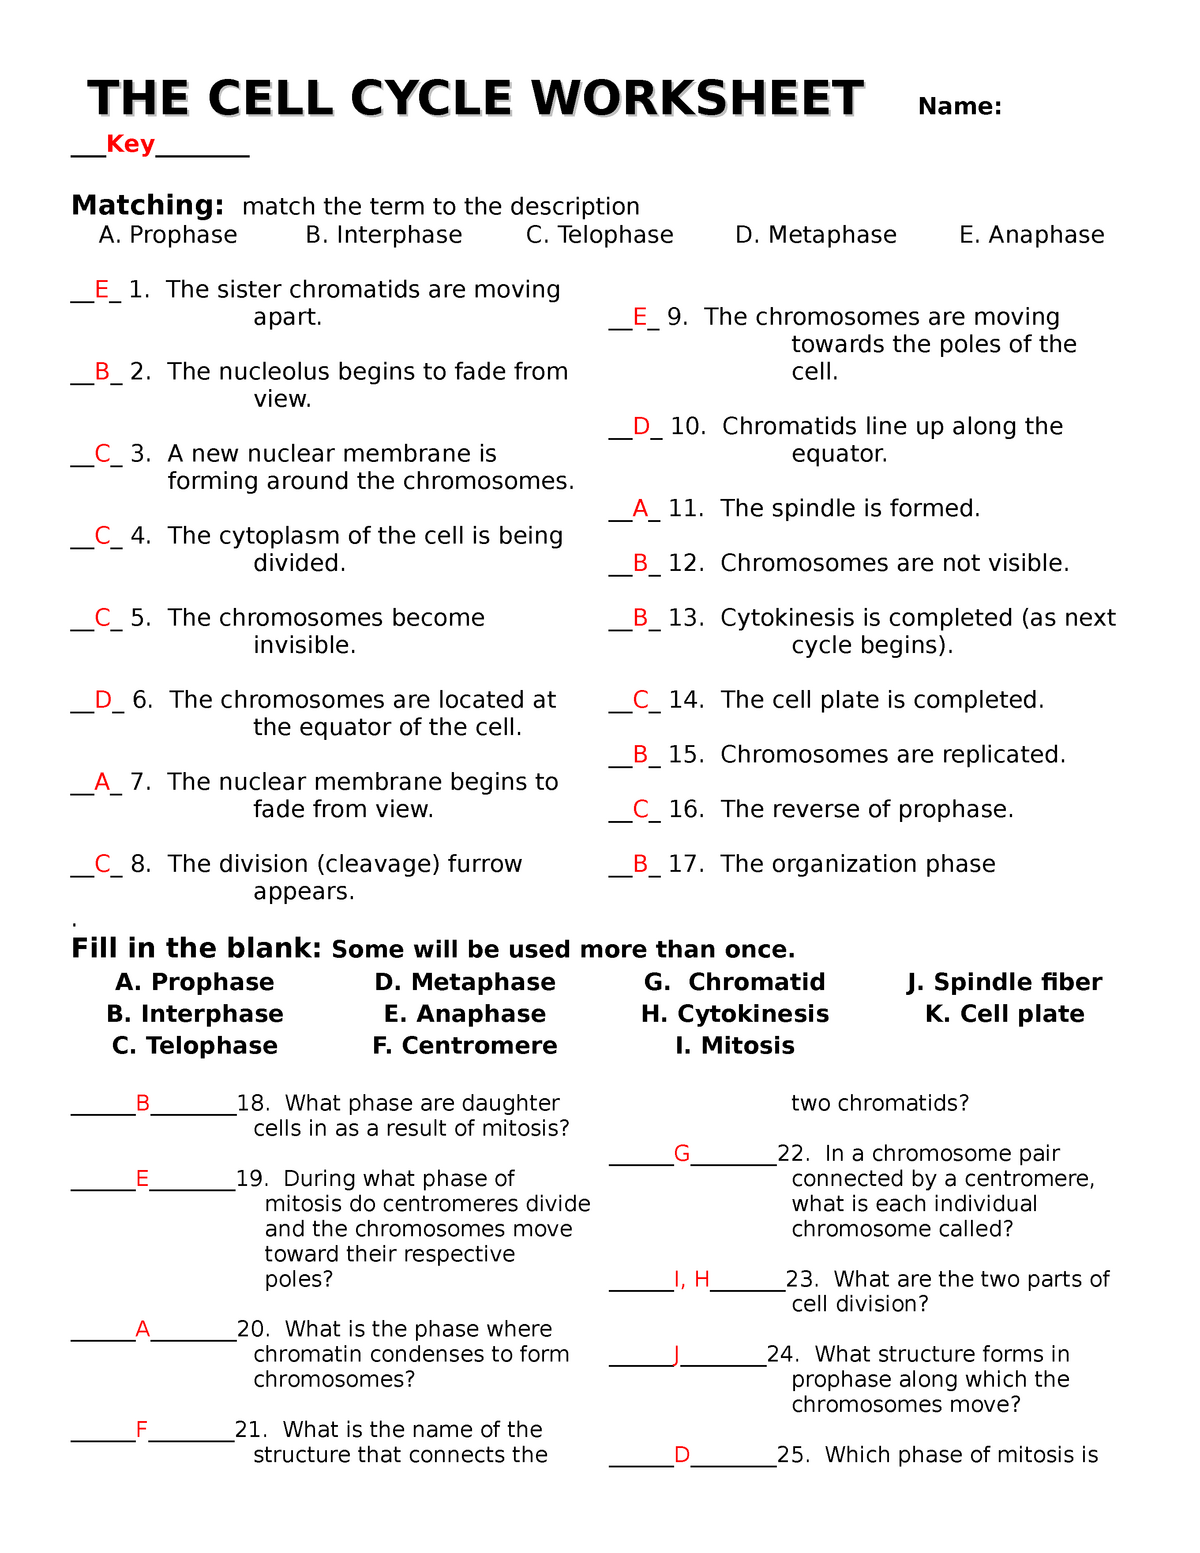 The-cell-cycle-worksheet with answers - StuDocu Inside Cell Cycle Worksheet Answer Key